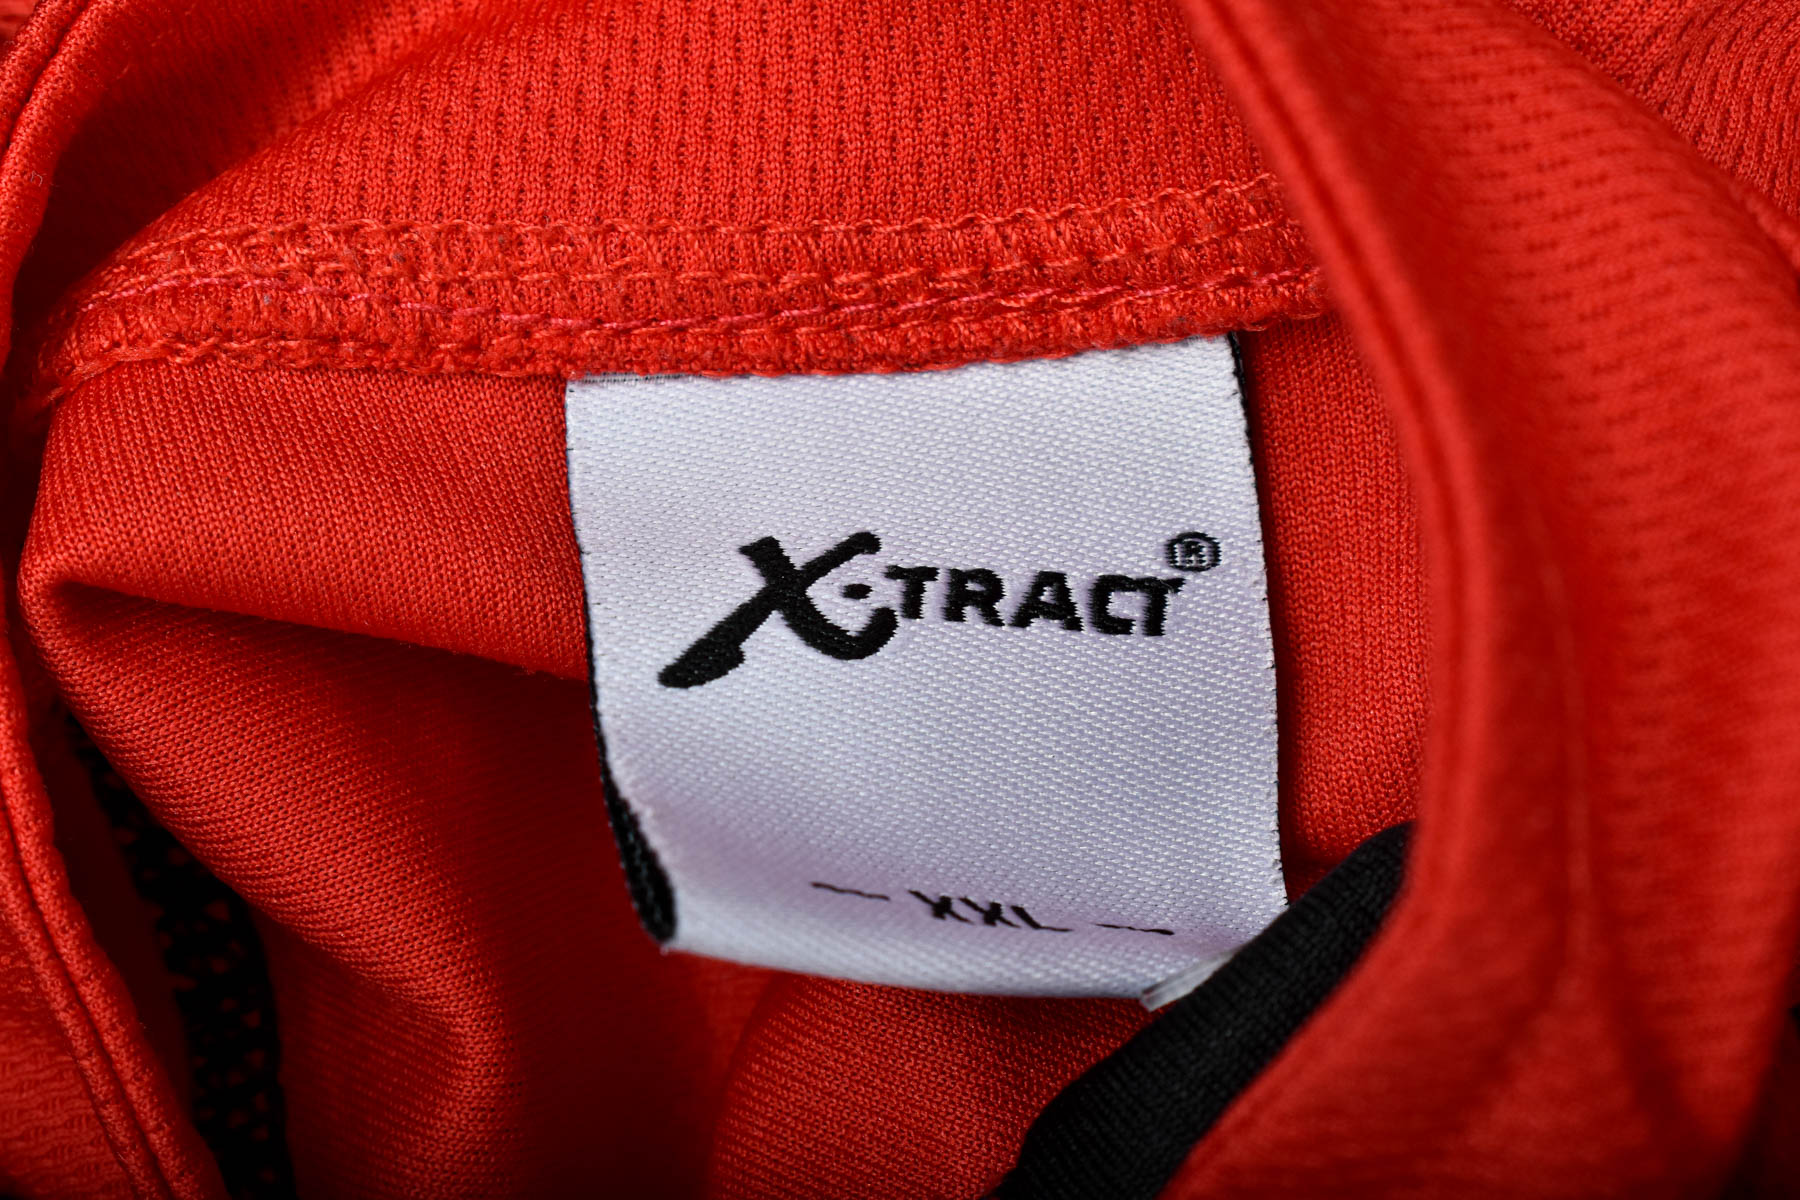 Men's T-shirt for cycling - Xtract - 2